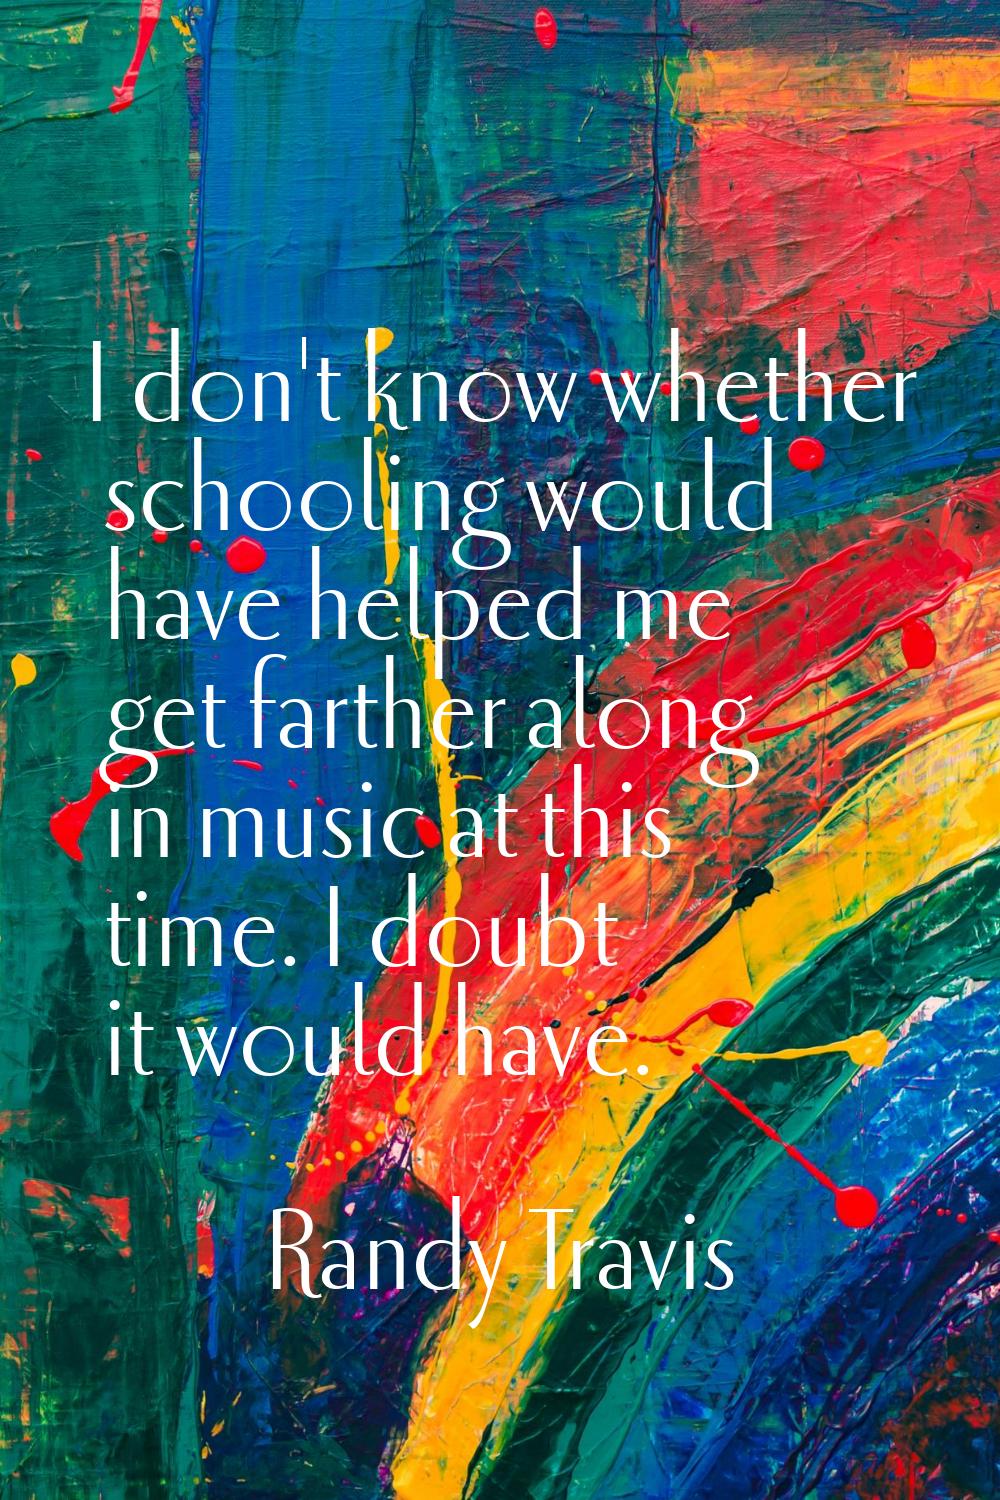 I don't know whether schooling would have helped me get farther along in music at this time. I doub